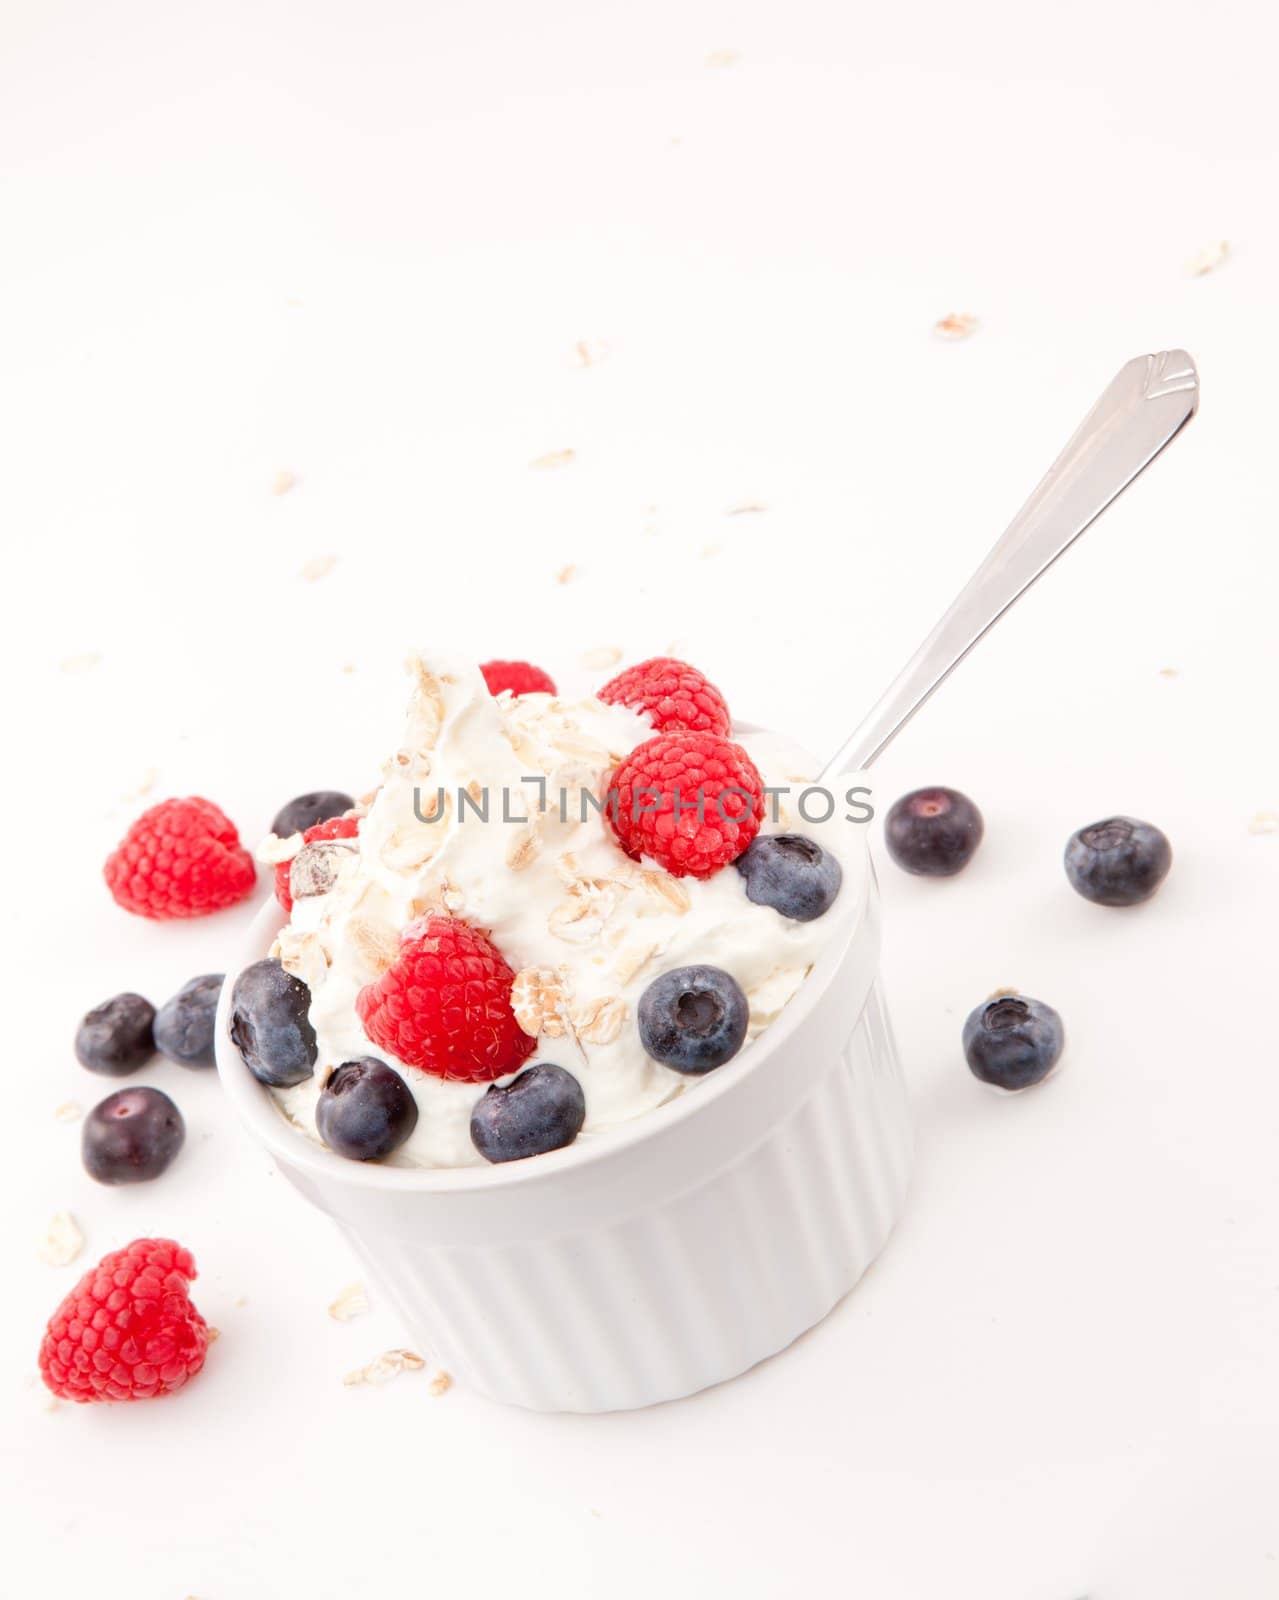 Whipped cream mix with berries and spoon by Wavebreakmedia